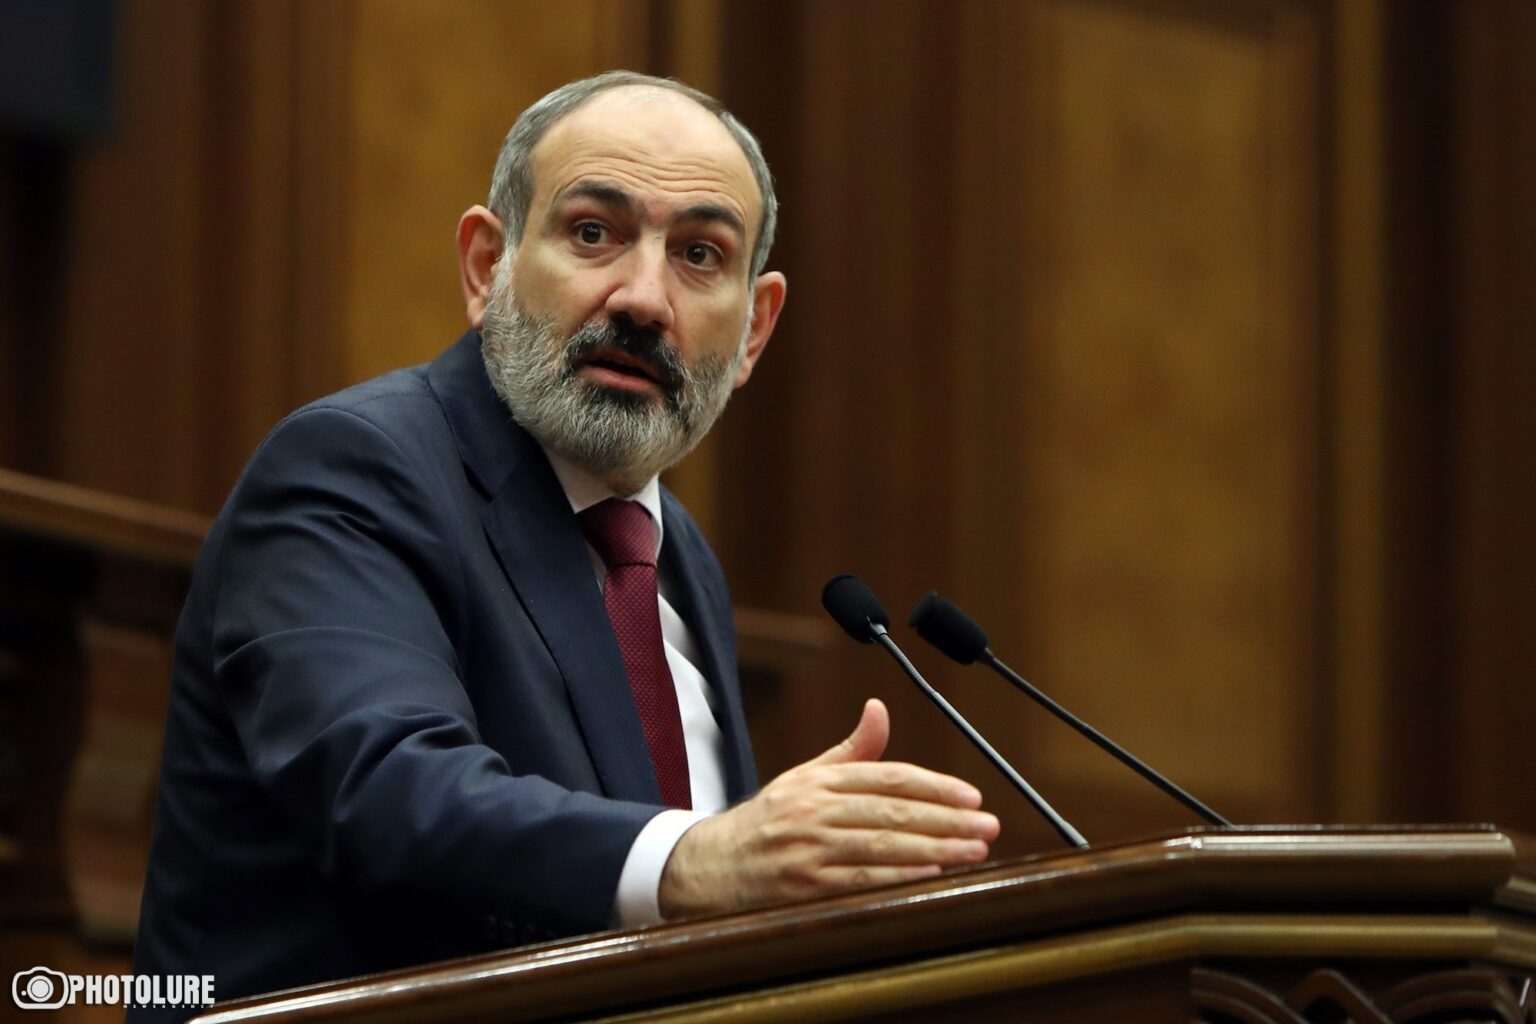 Pashinyan says ready to reach agreement with Azerbaijan, but stresses nothing ‘has been signed’